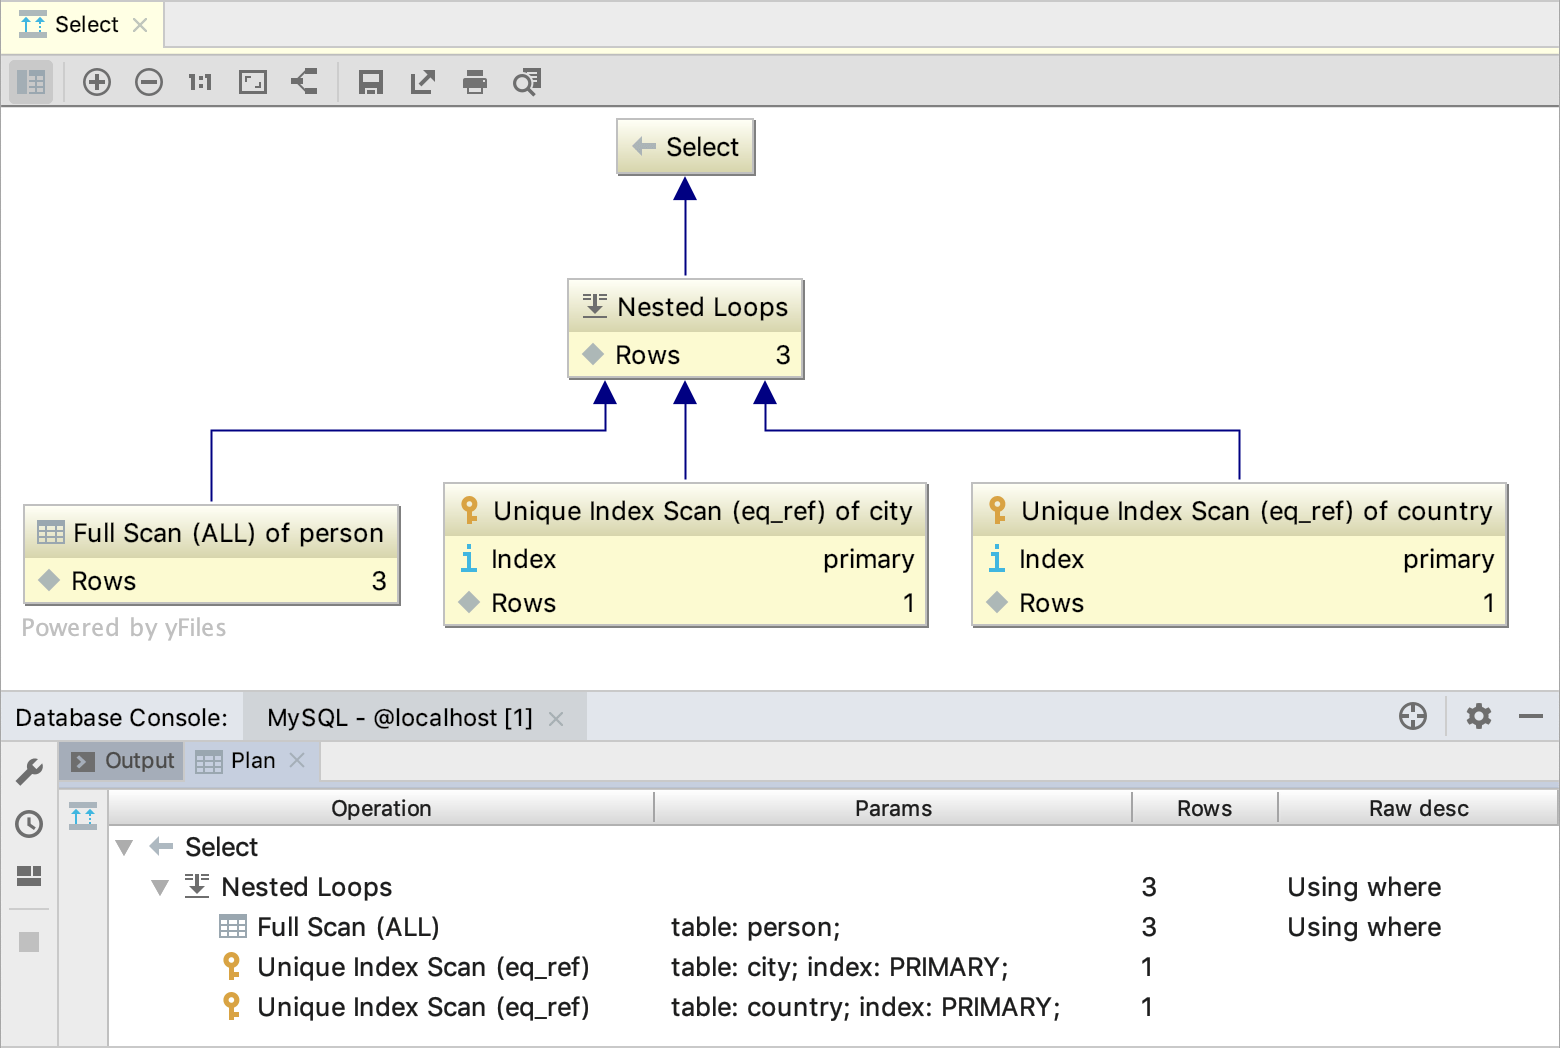 Viewing SQL Query map